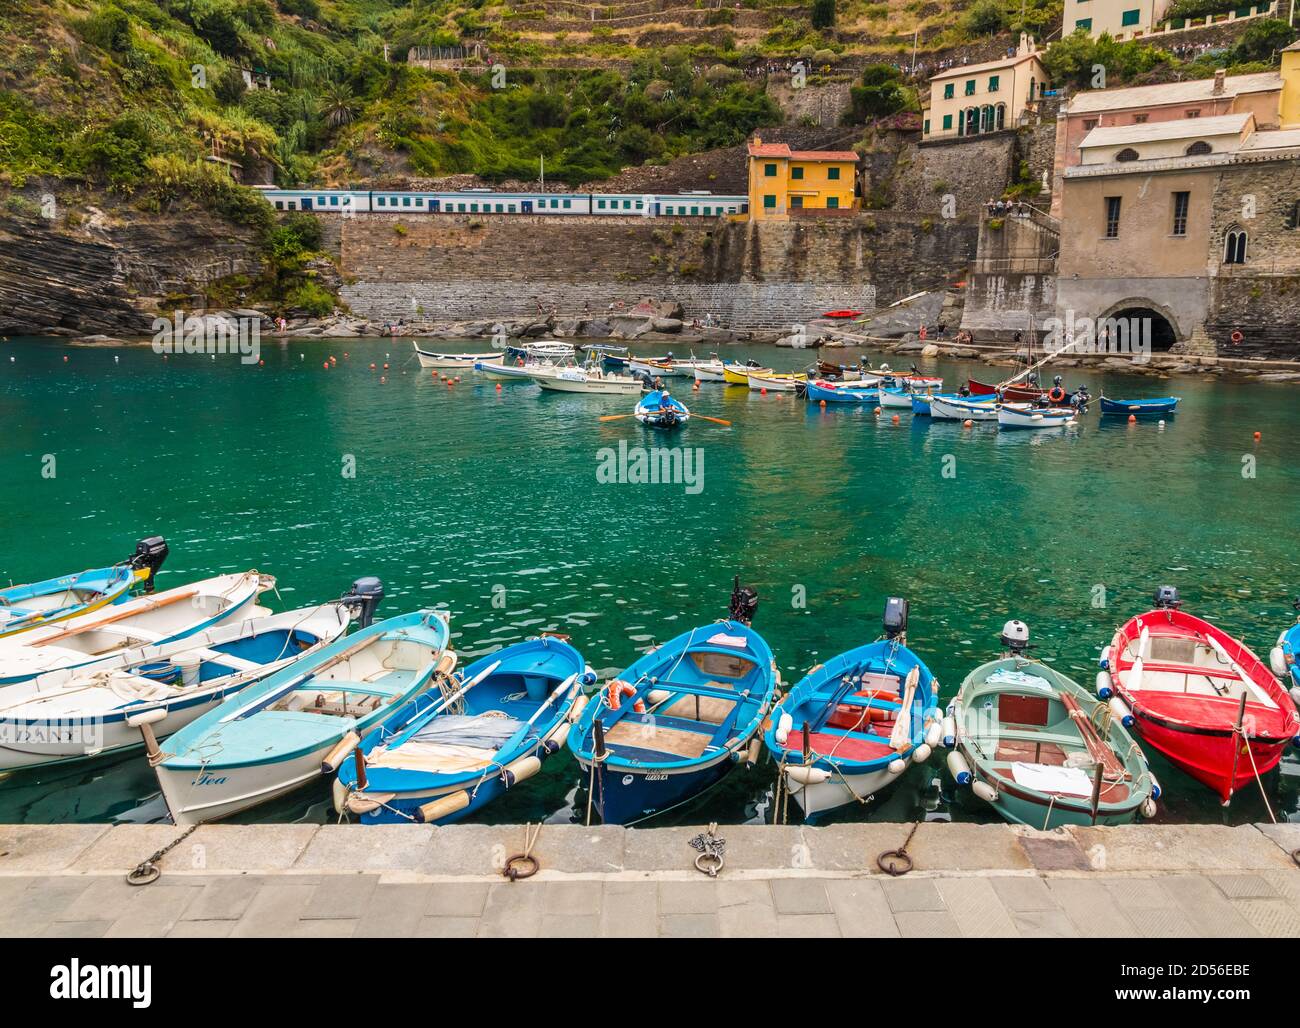 Lovely view of the port of Vernazza in the Cinque Terre coastal area. Small boats, floating on shallow turquoise water, are tied up to the pier and in... Stock Photo